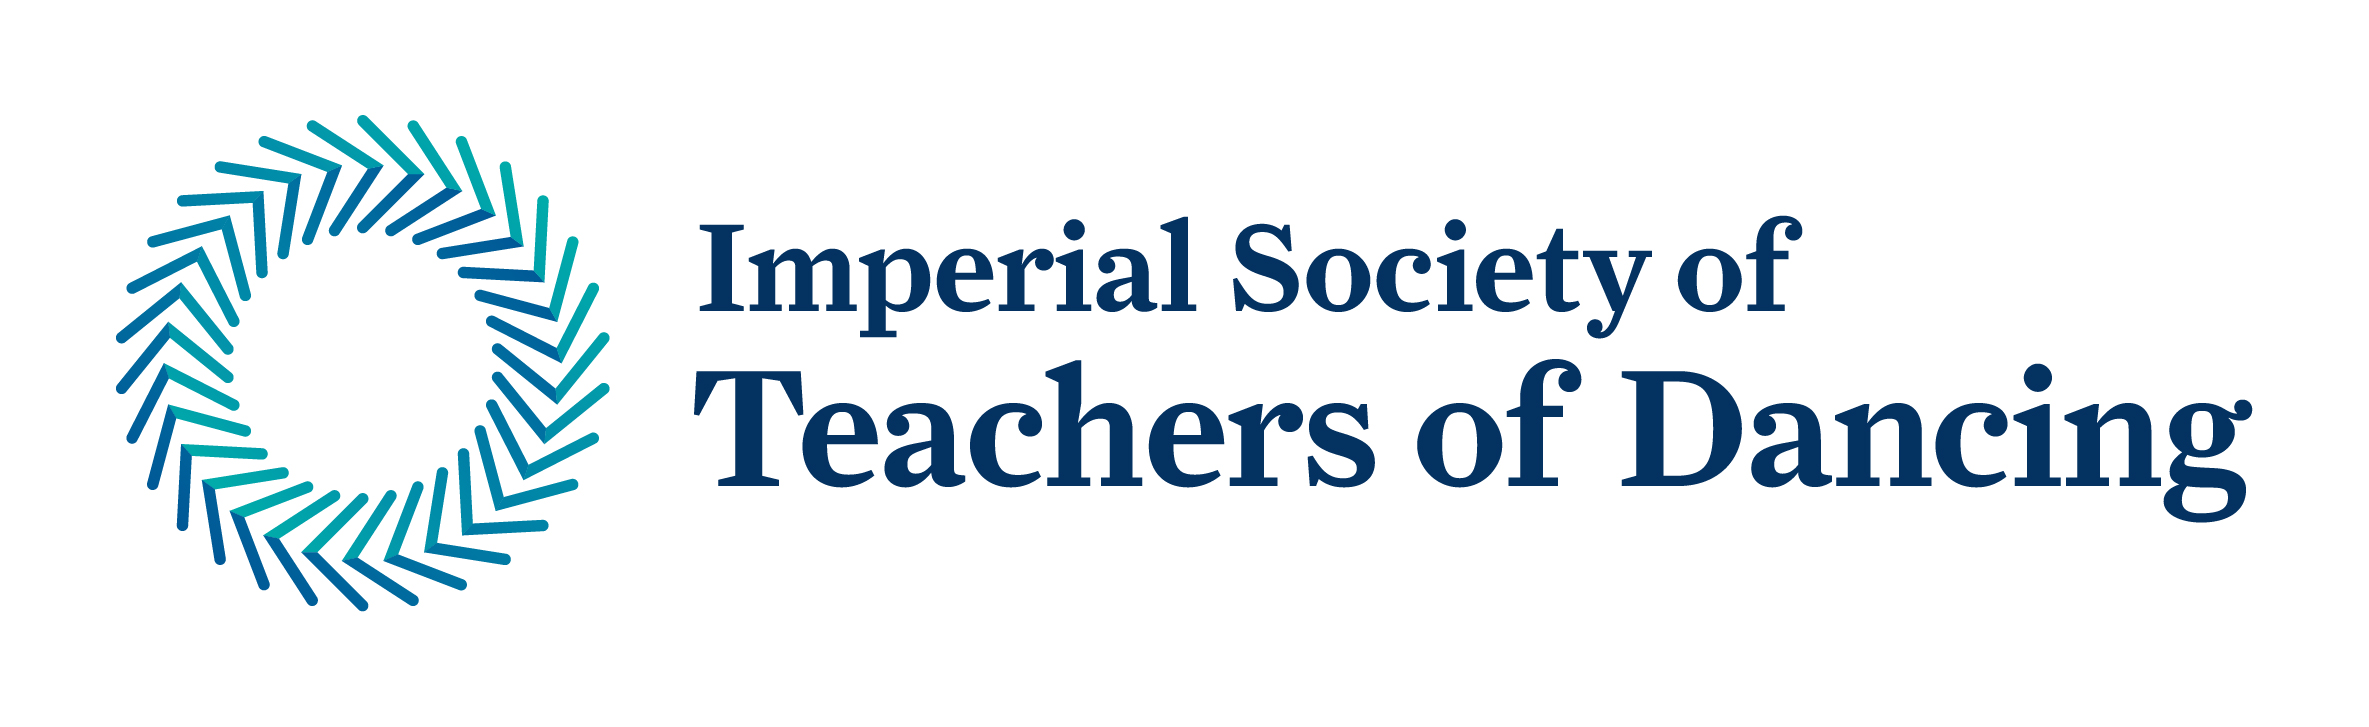 ISTD Logo Imperial Society of Teachers of Dancing